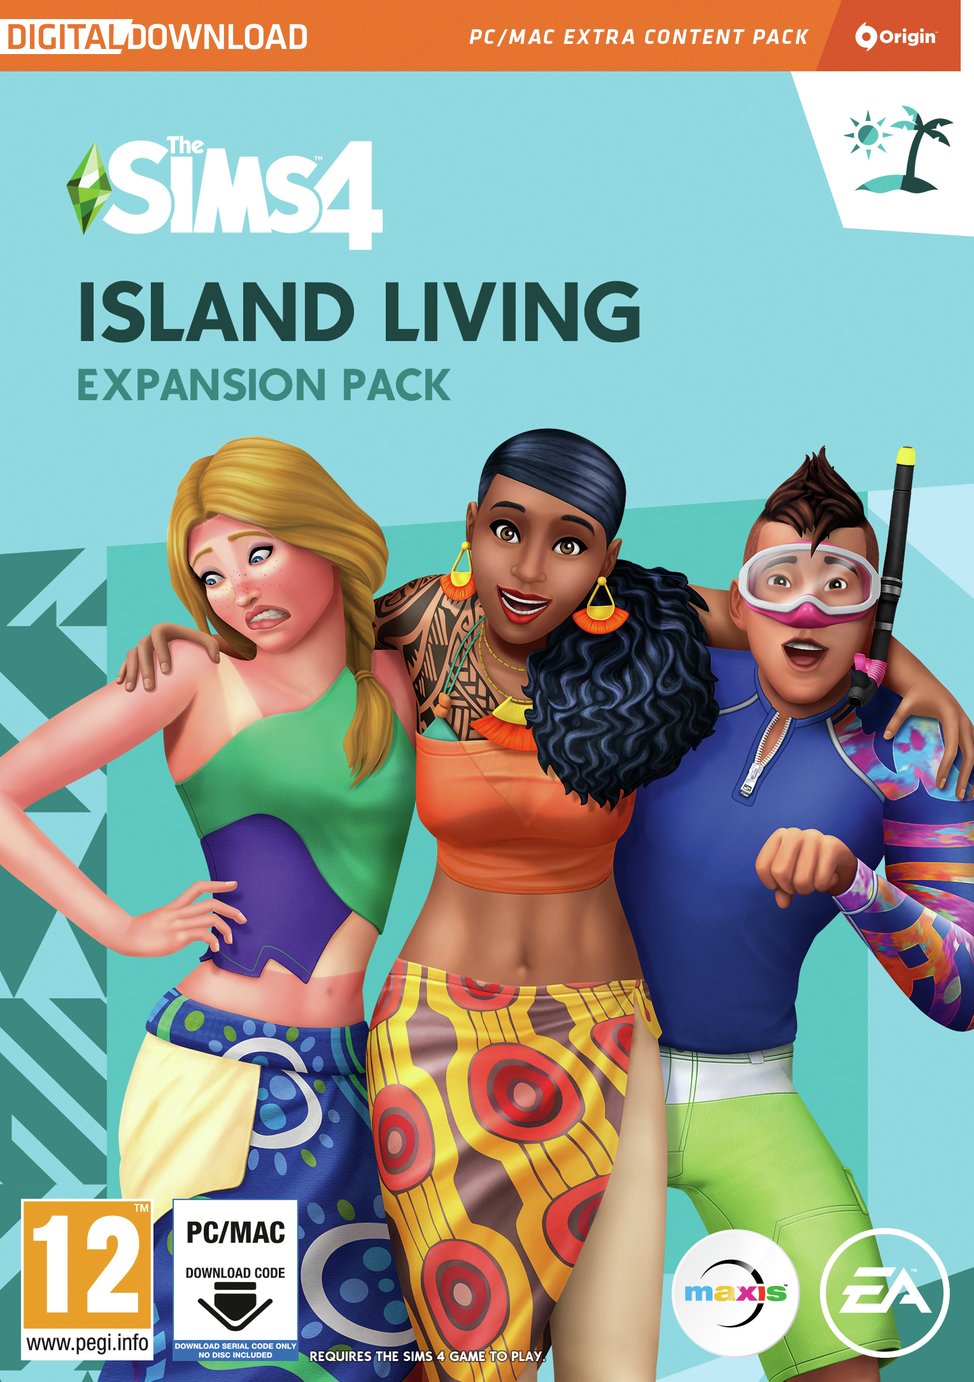 The Sims 4 Island Living PC Game